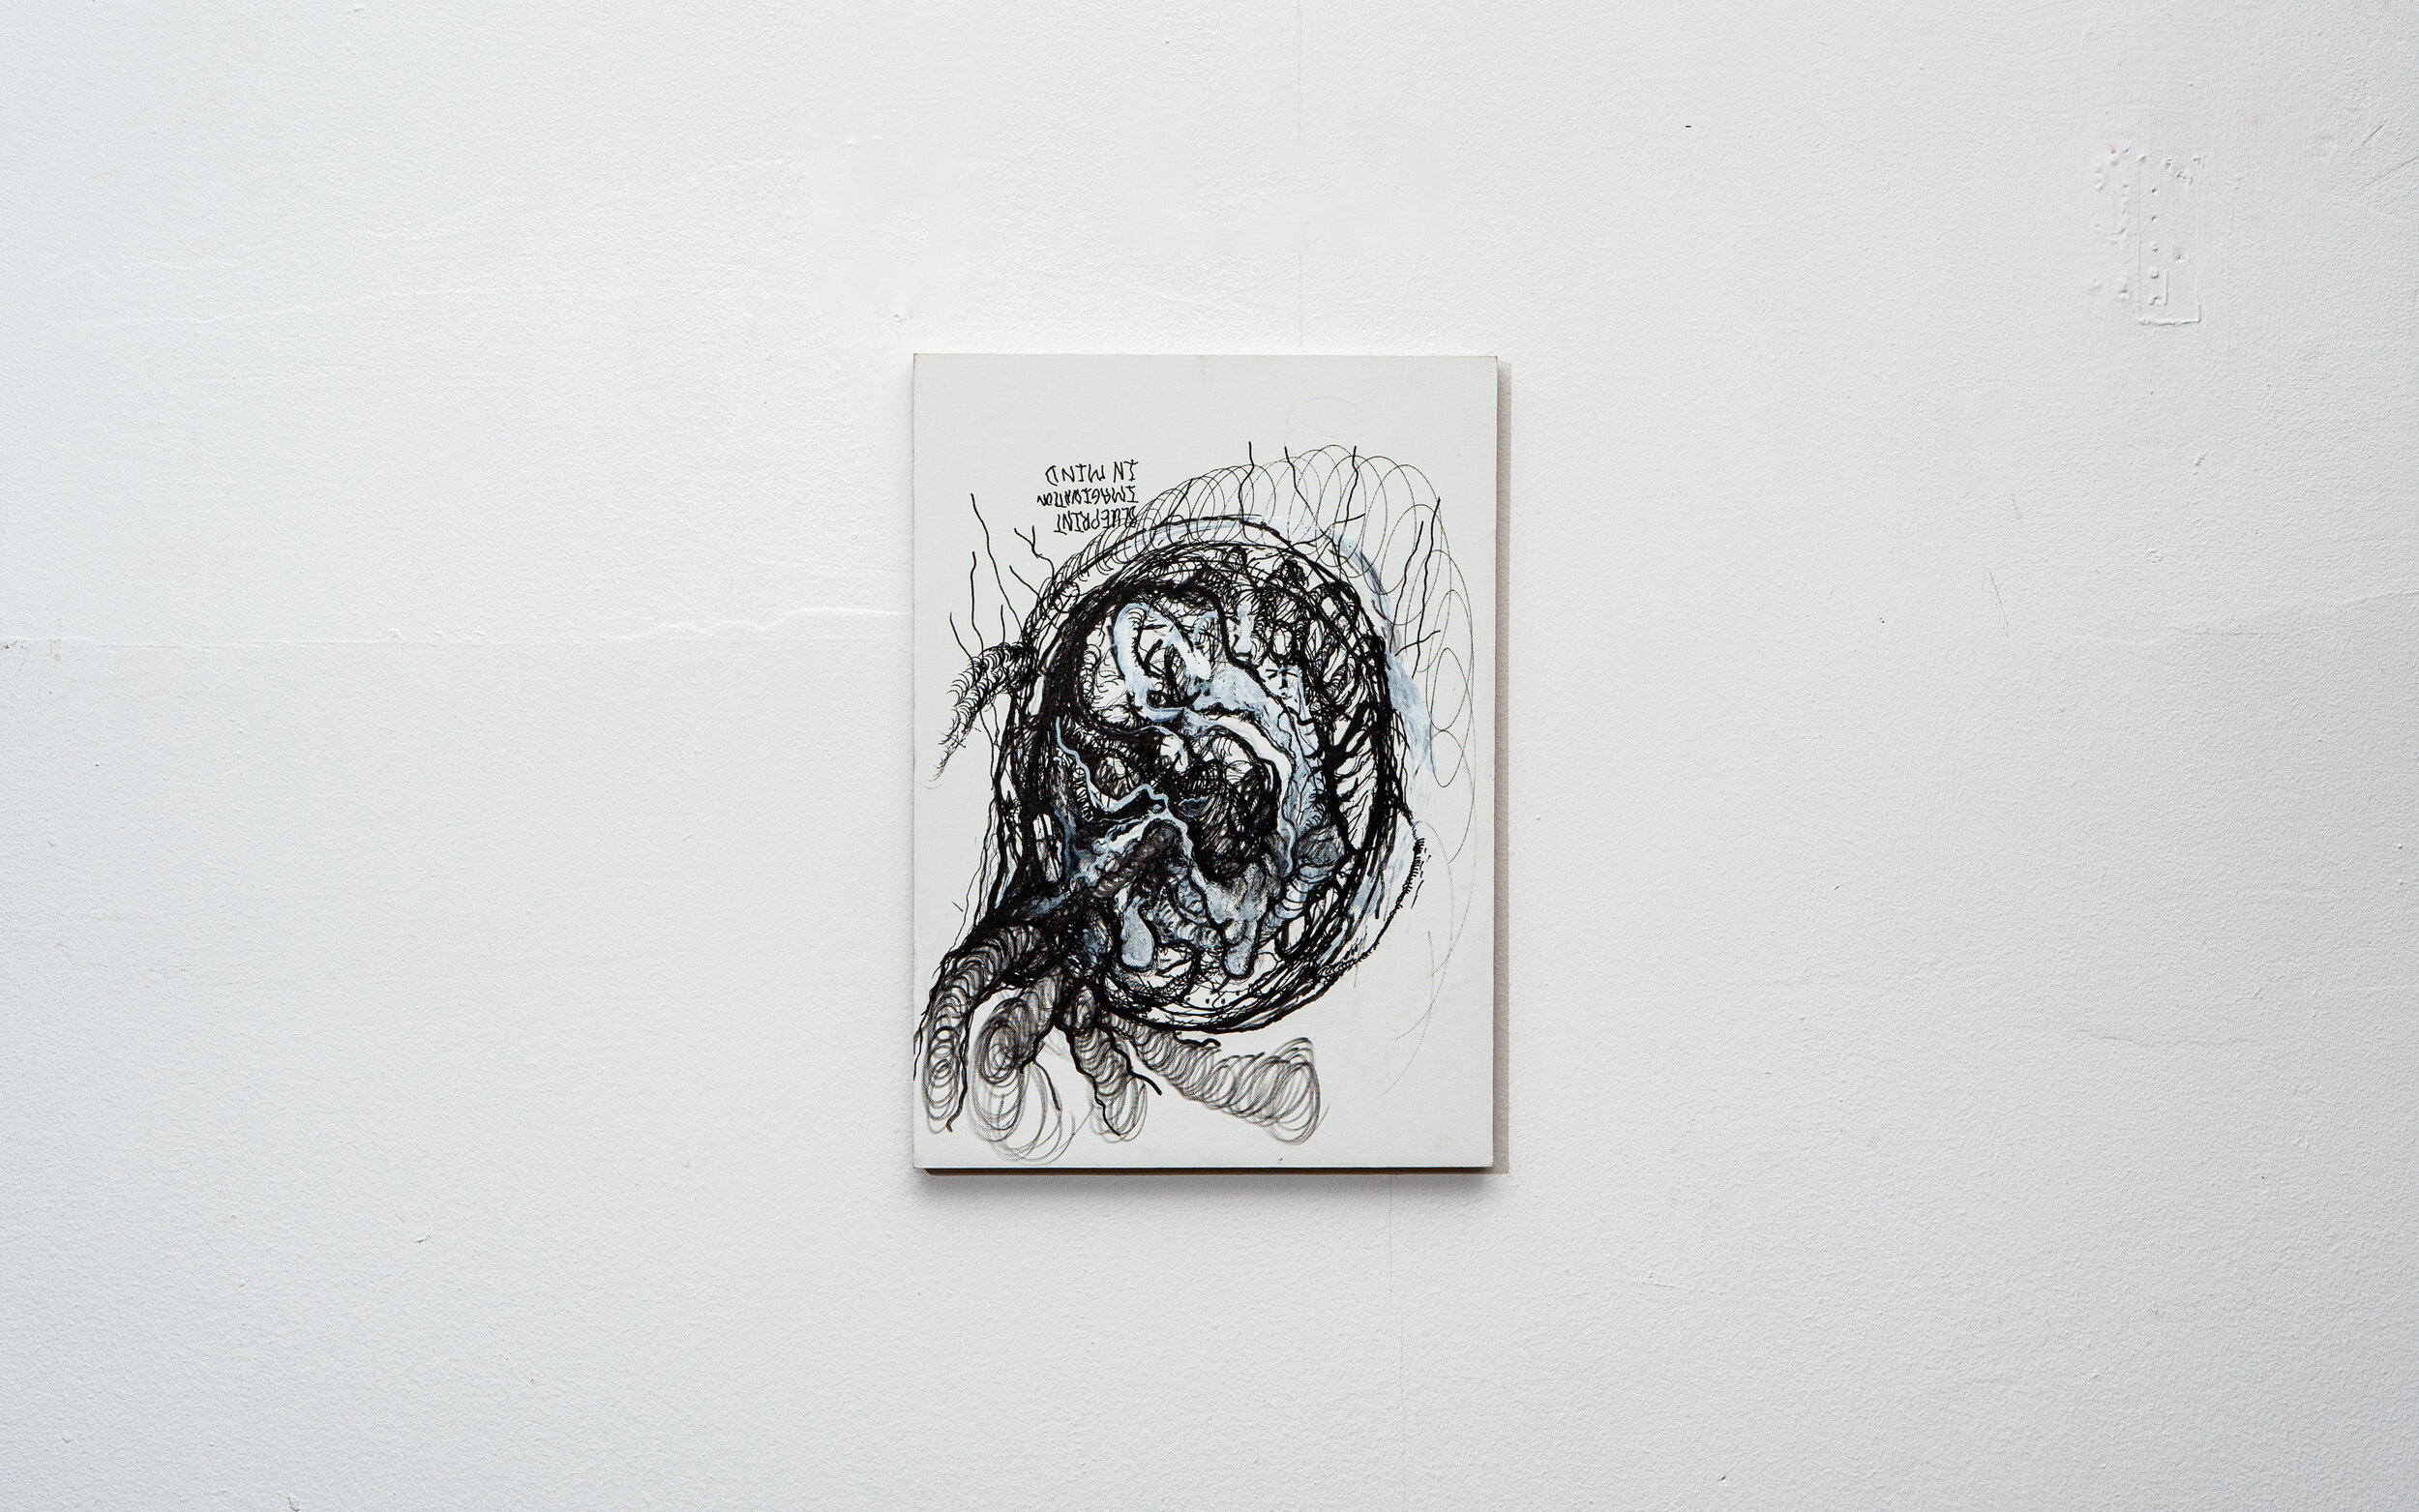  VOID EGG, 30 x 42 x 2 cm, 2020,   oil paint and ink on canvas mounted on wood panel 